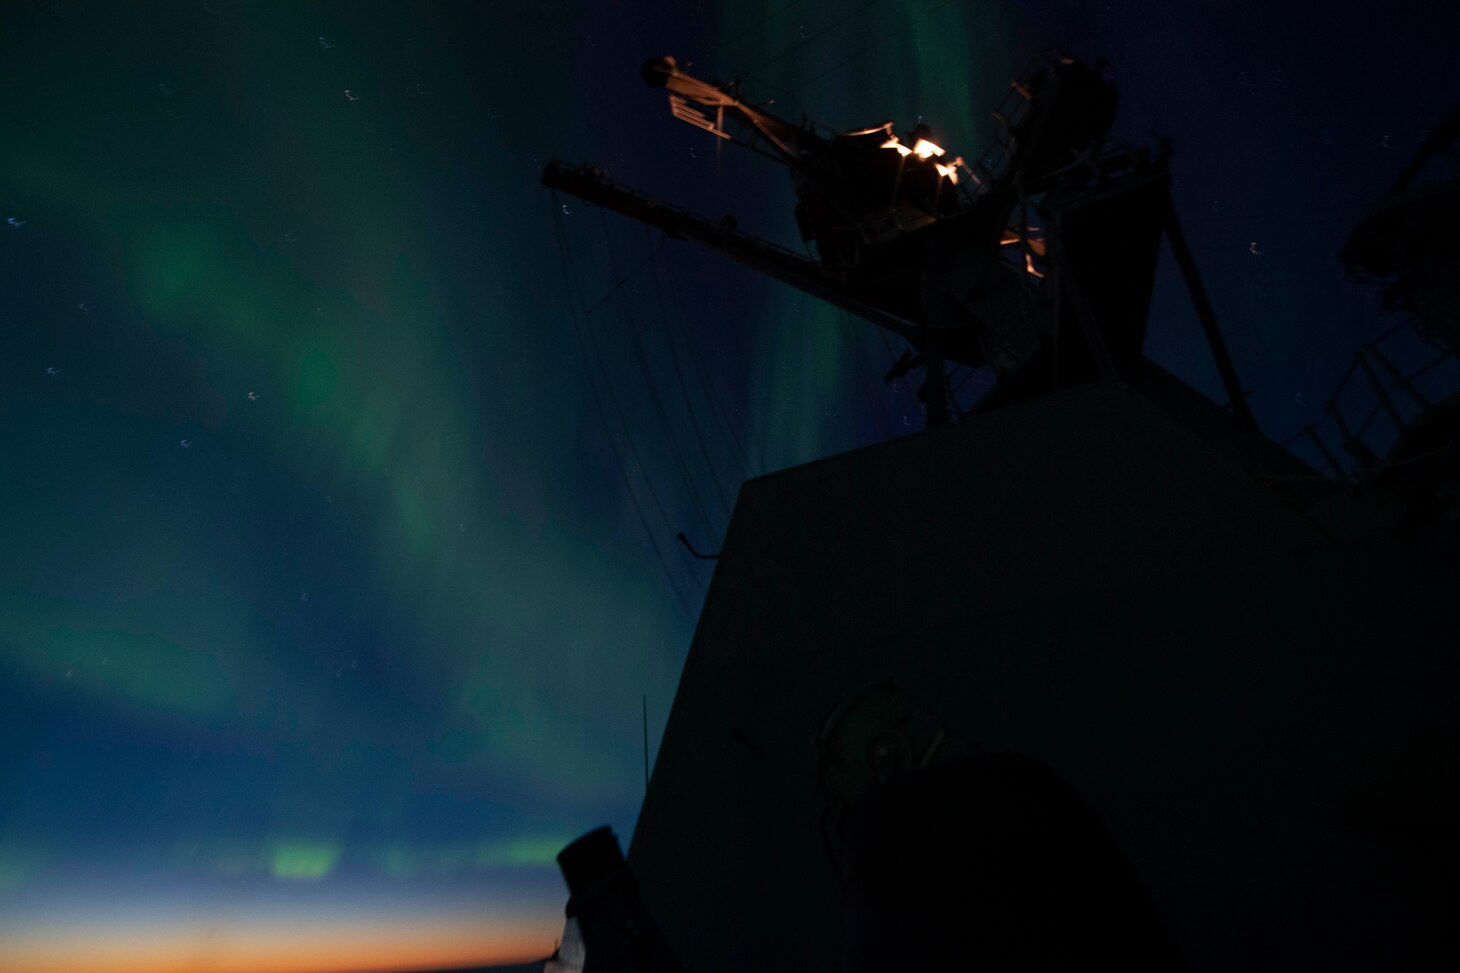 The Aurora Borealis appears in the night sky over the Arleigh Burke-class guided-missile destroyer USS Thomas Hudner (DDG 116).